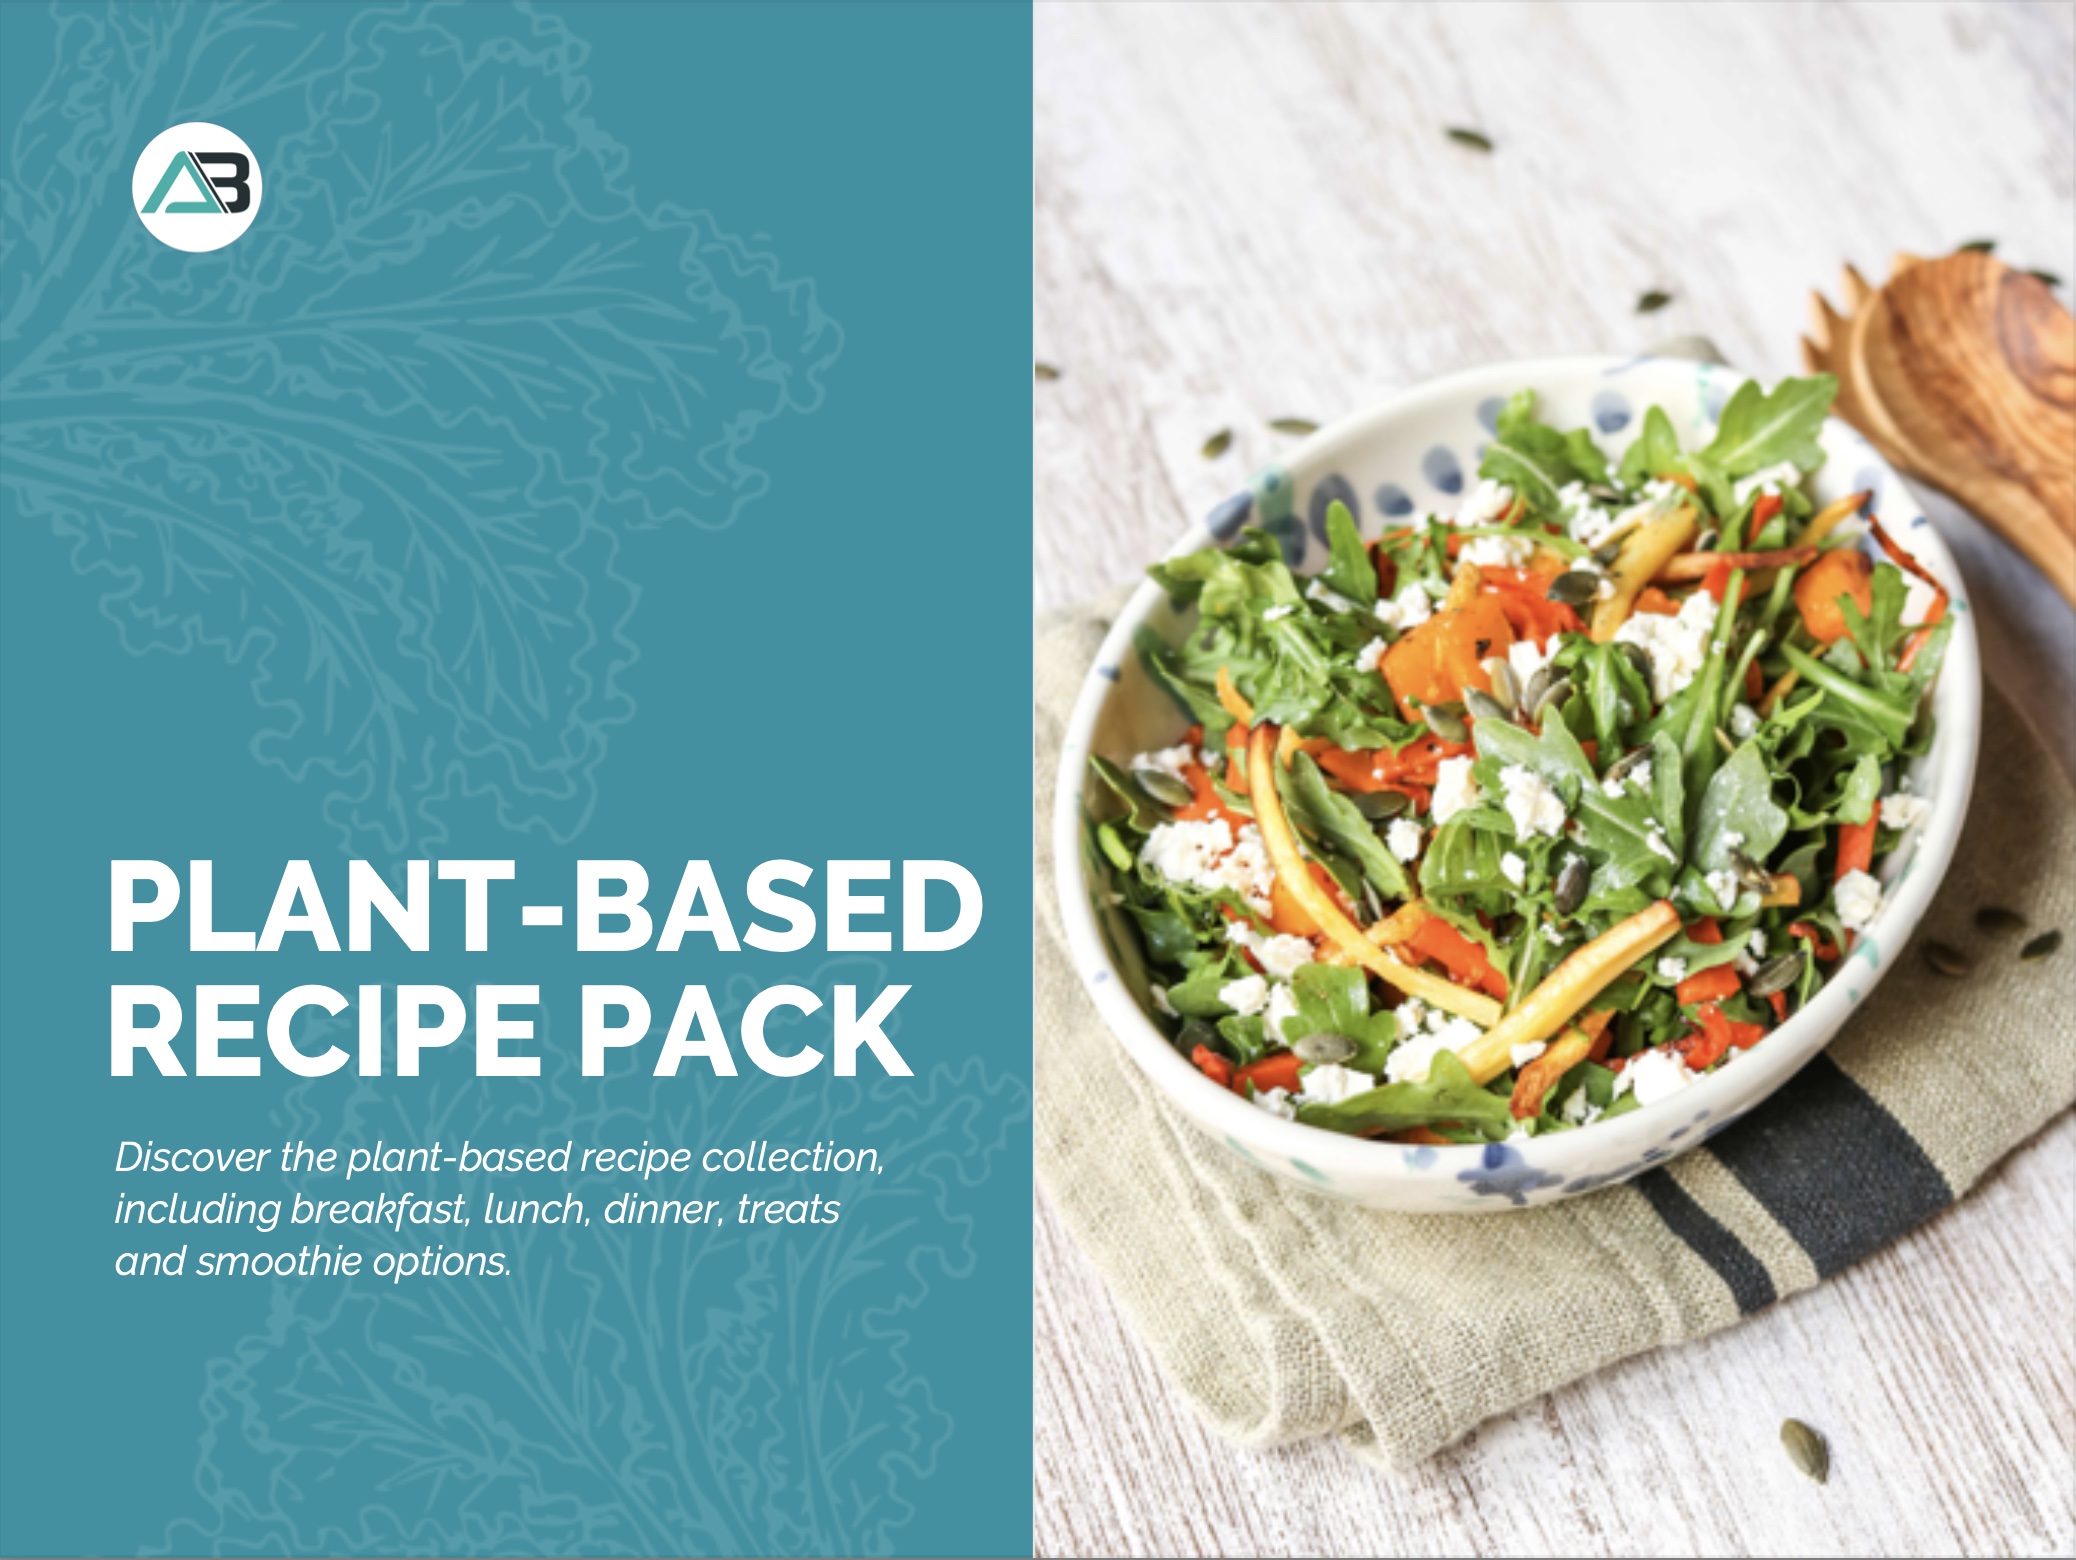 Plant-Based Recipe Snack front cover | Featured Image for Recipe Packs page by AB Fitness Hub.